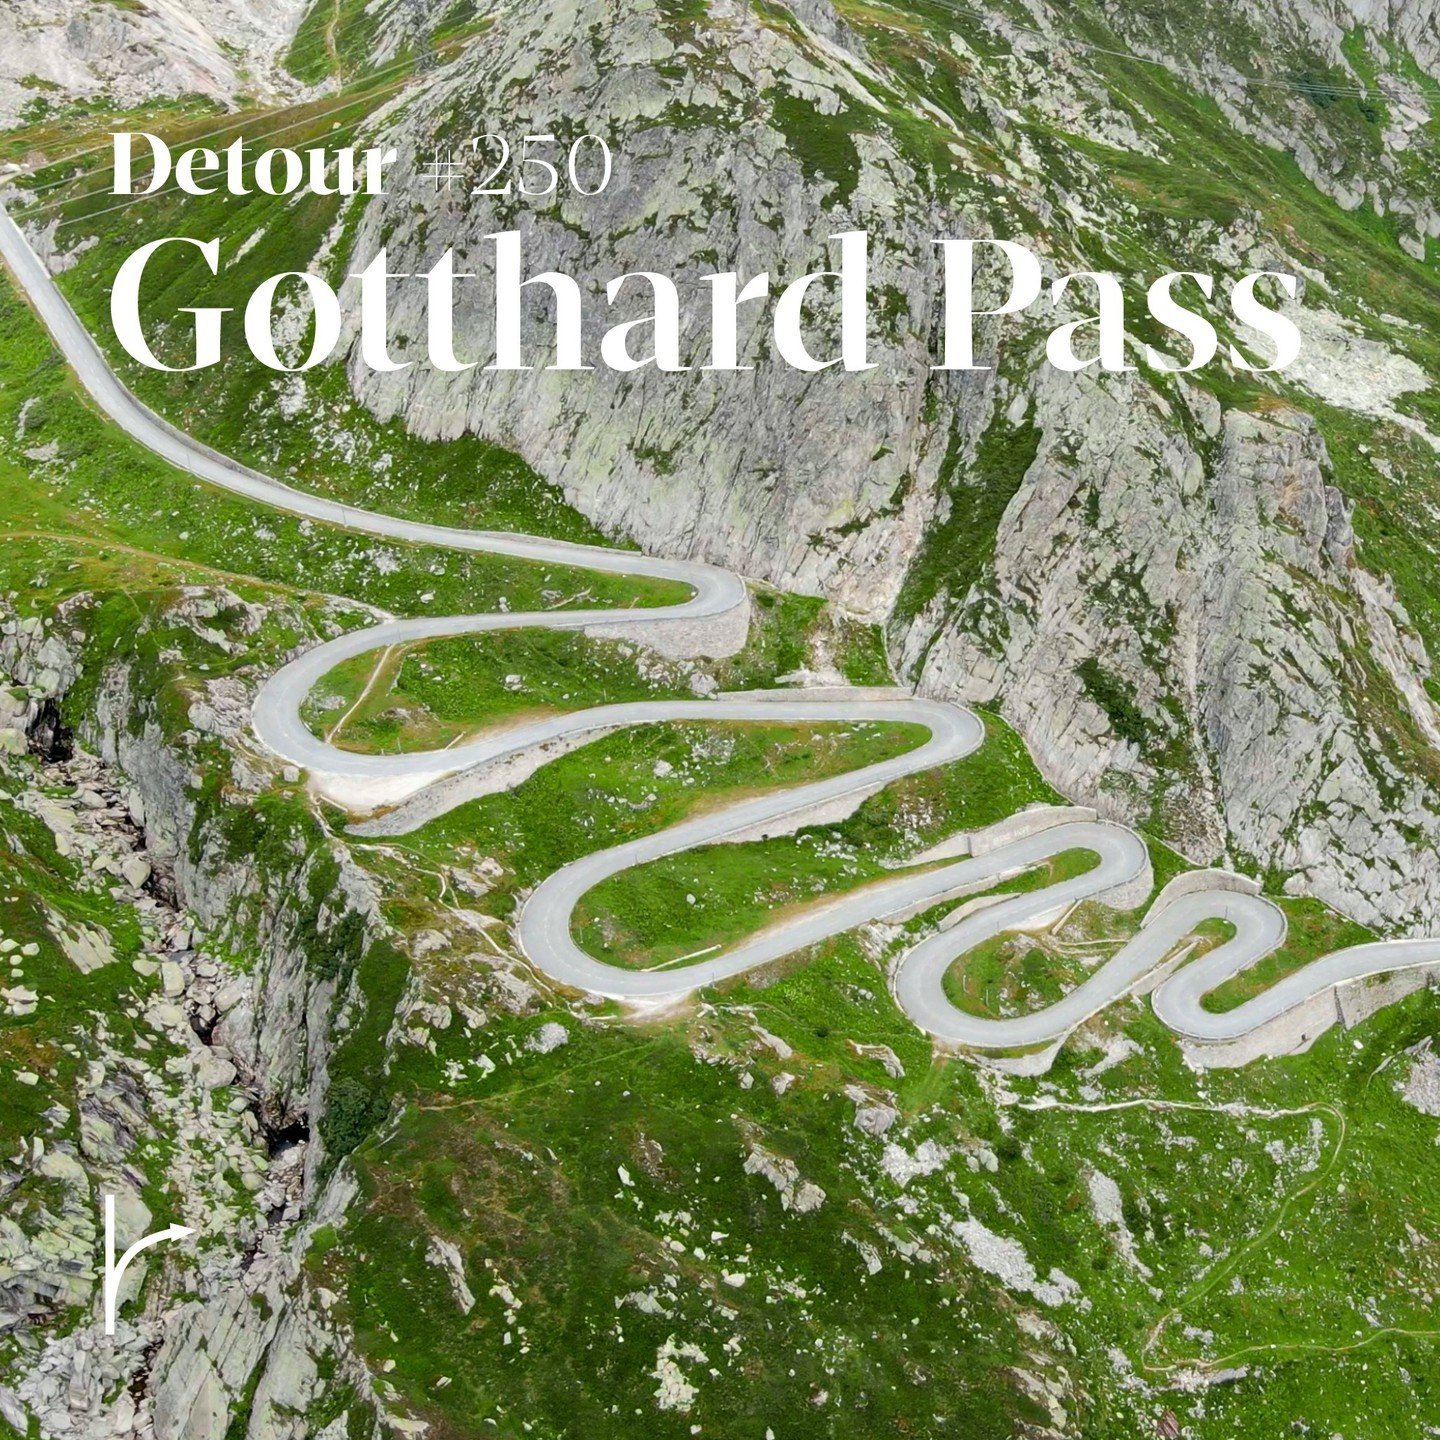 Opening soon! The glorious Gotthard Pass is due to re-open again in May, inviting drivers to take the longer way between Airolo and Andermatt, avoiding the main tunnel.⁠
⁠
&quot;Detour recommends starting from the south in Airolo as you&rsquo;ll be s